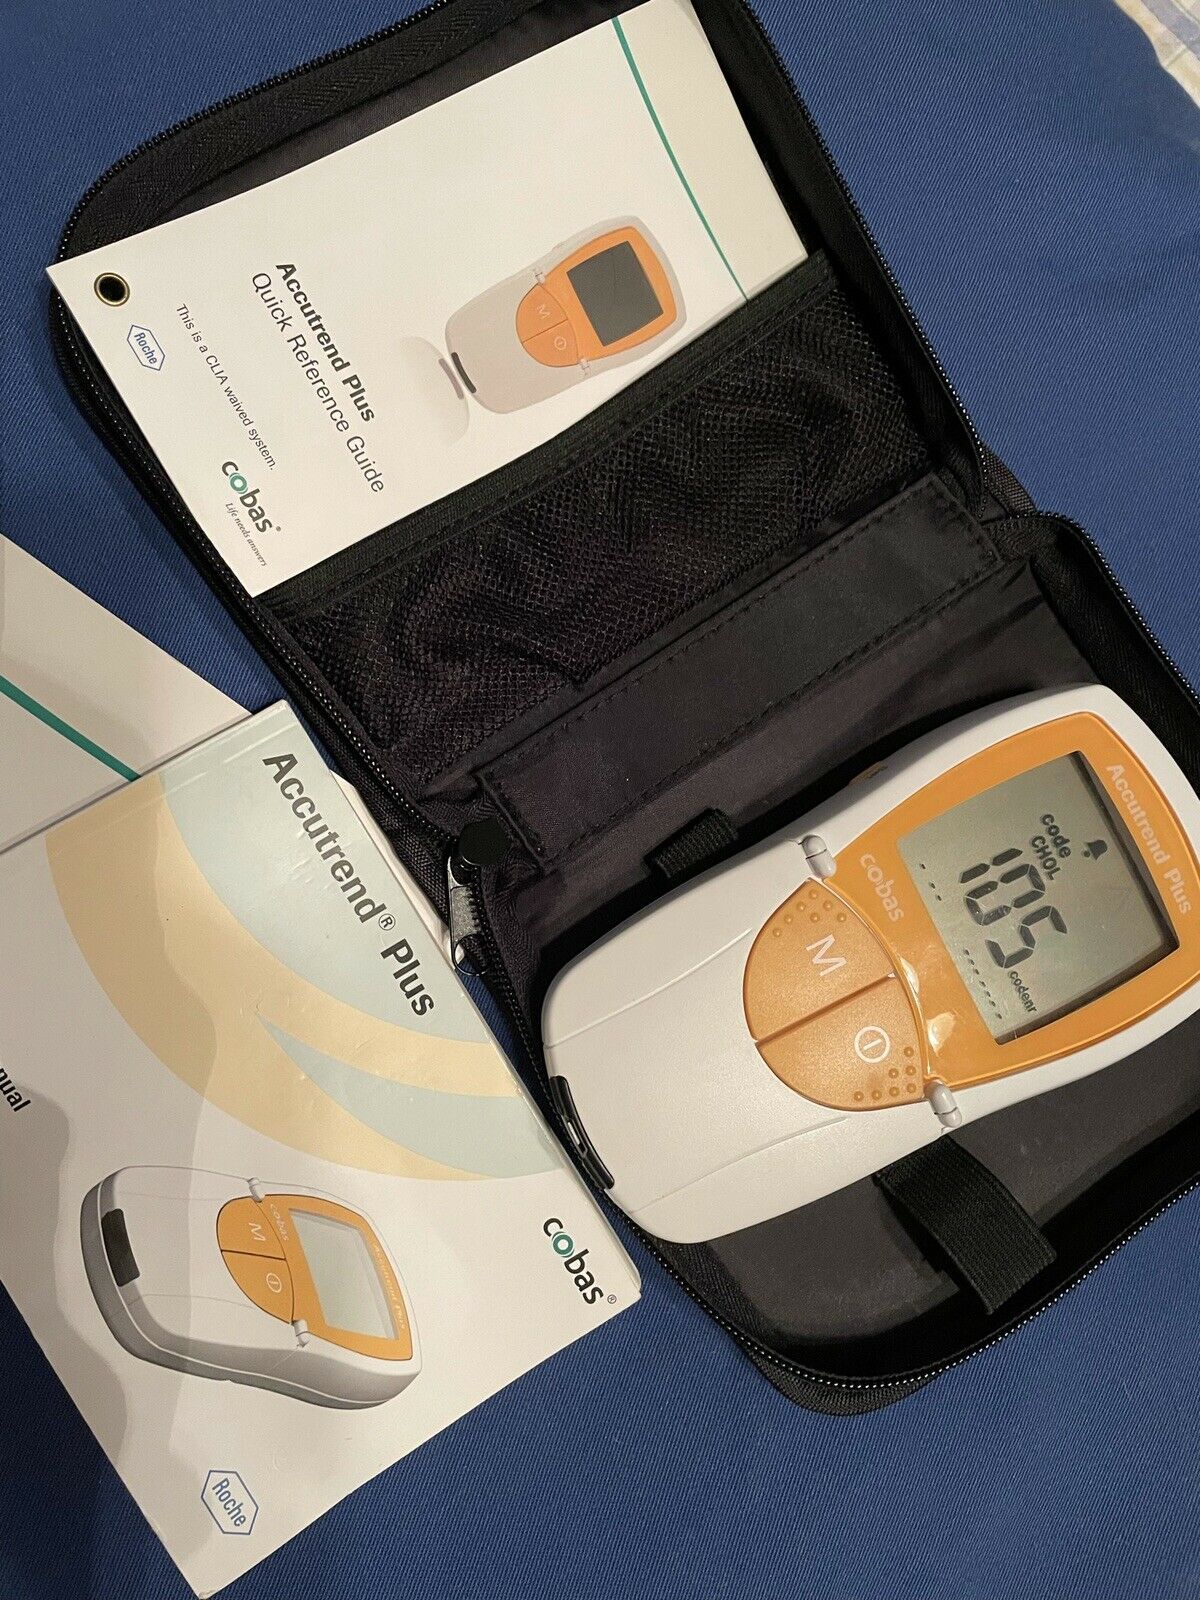 Accutrend Plus Glucose And Cholesterol Meter With Case And Manuals.